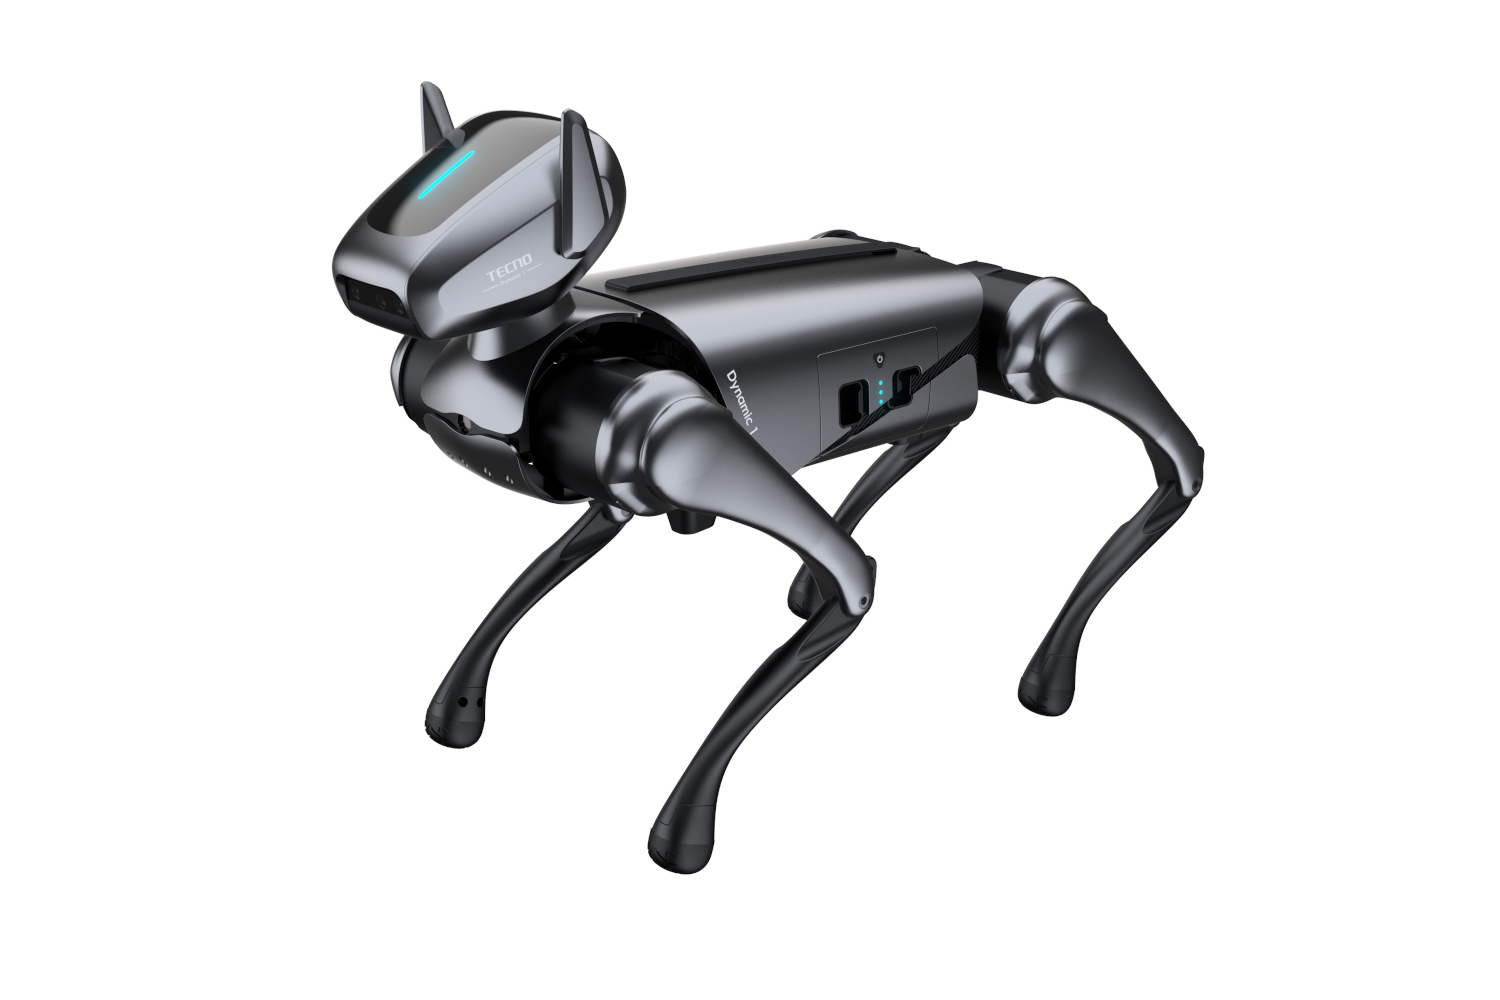 Tecno's Dynamic 1 robot dog from another angle.